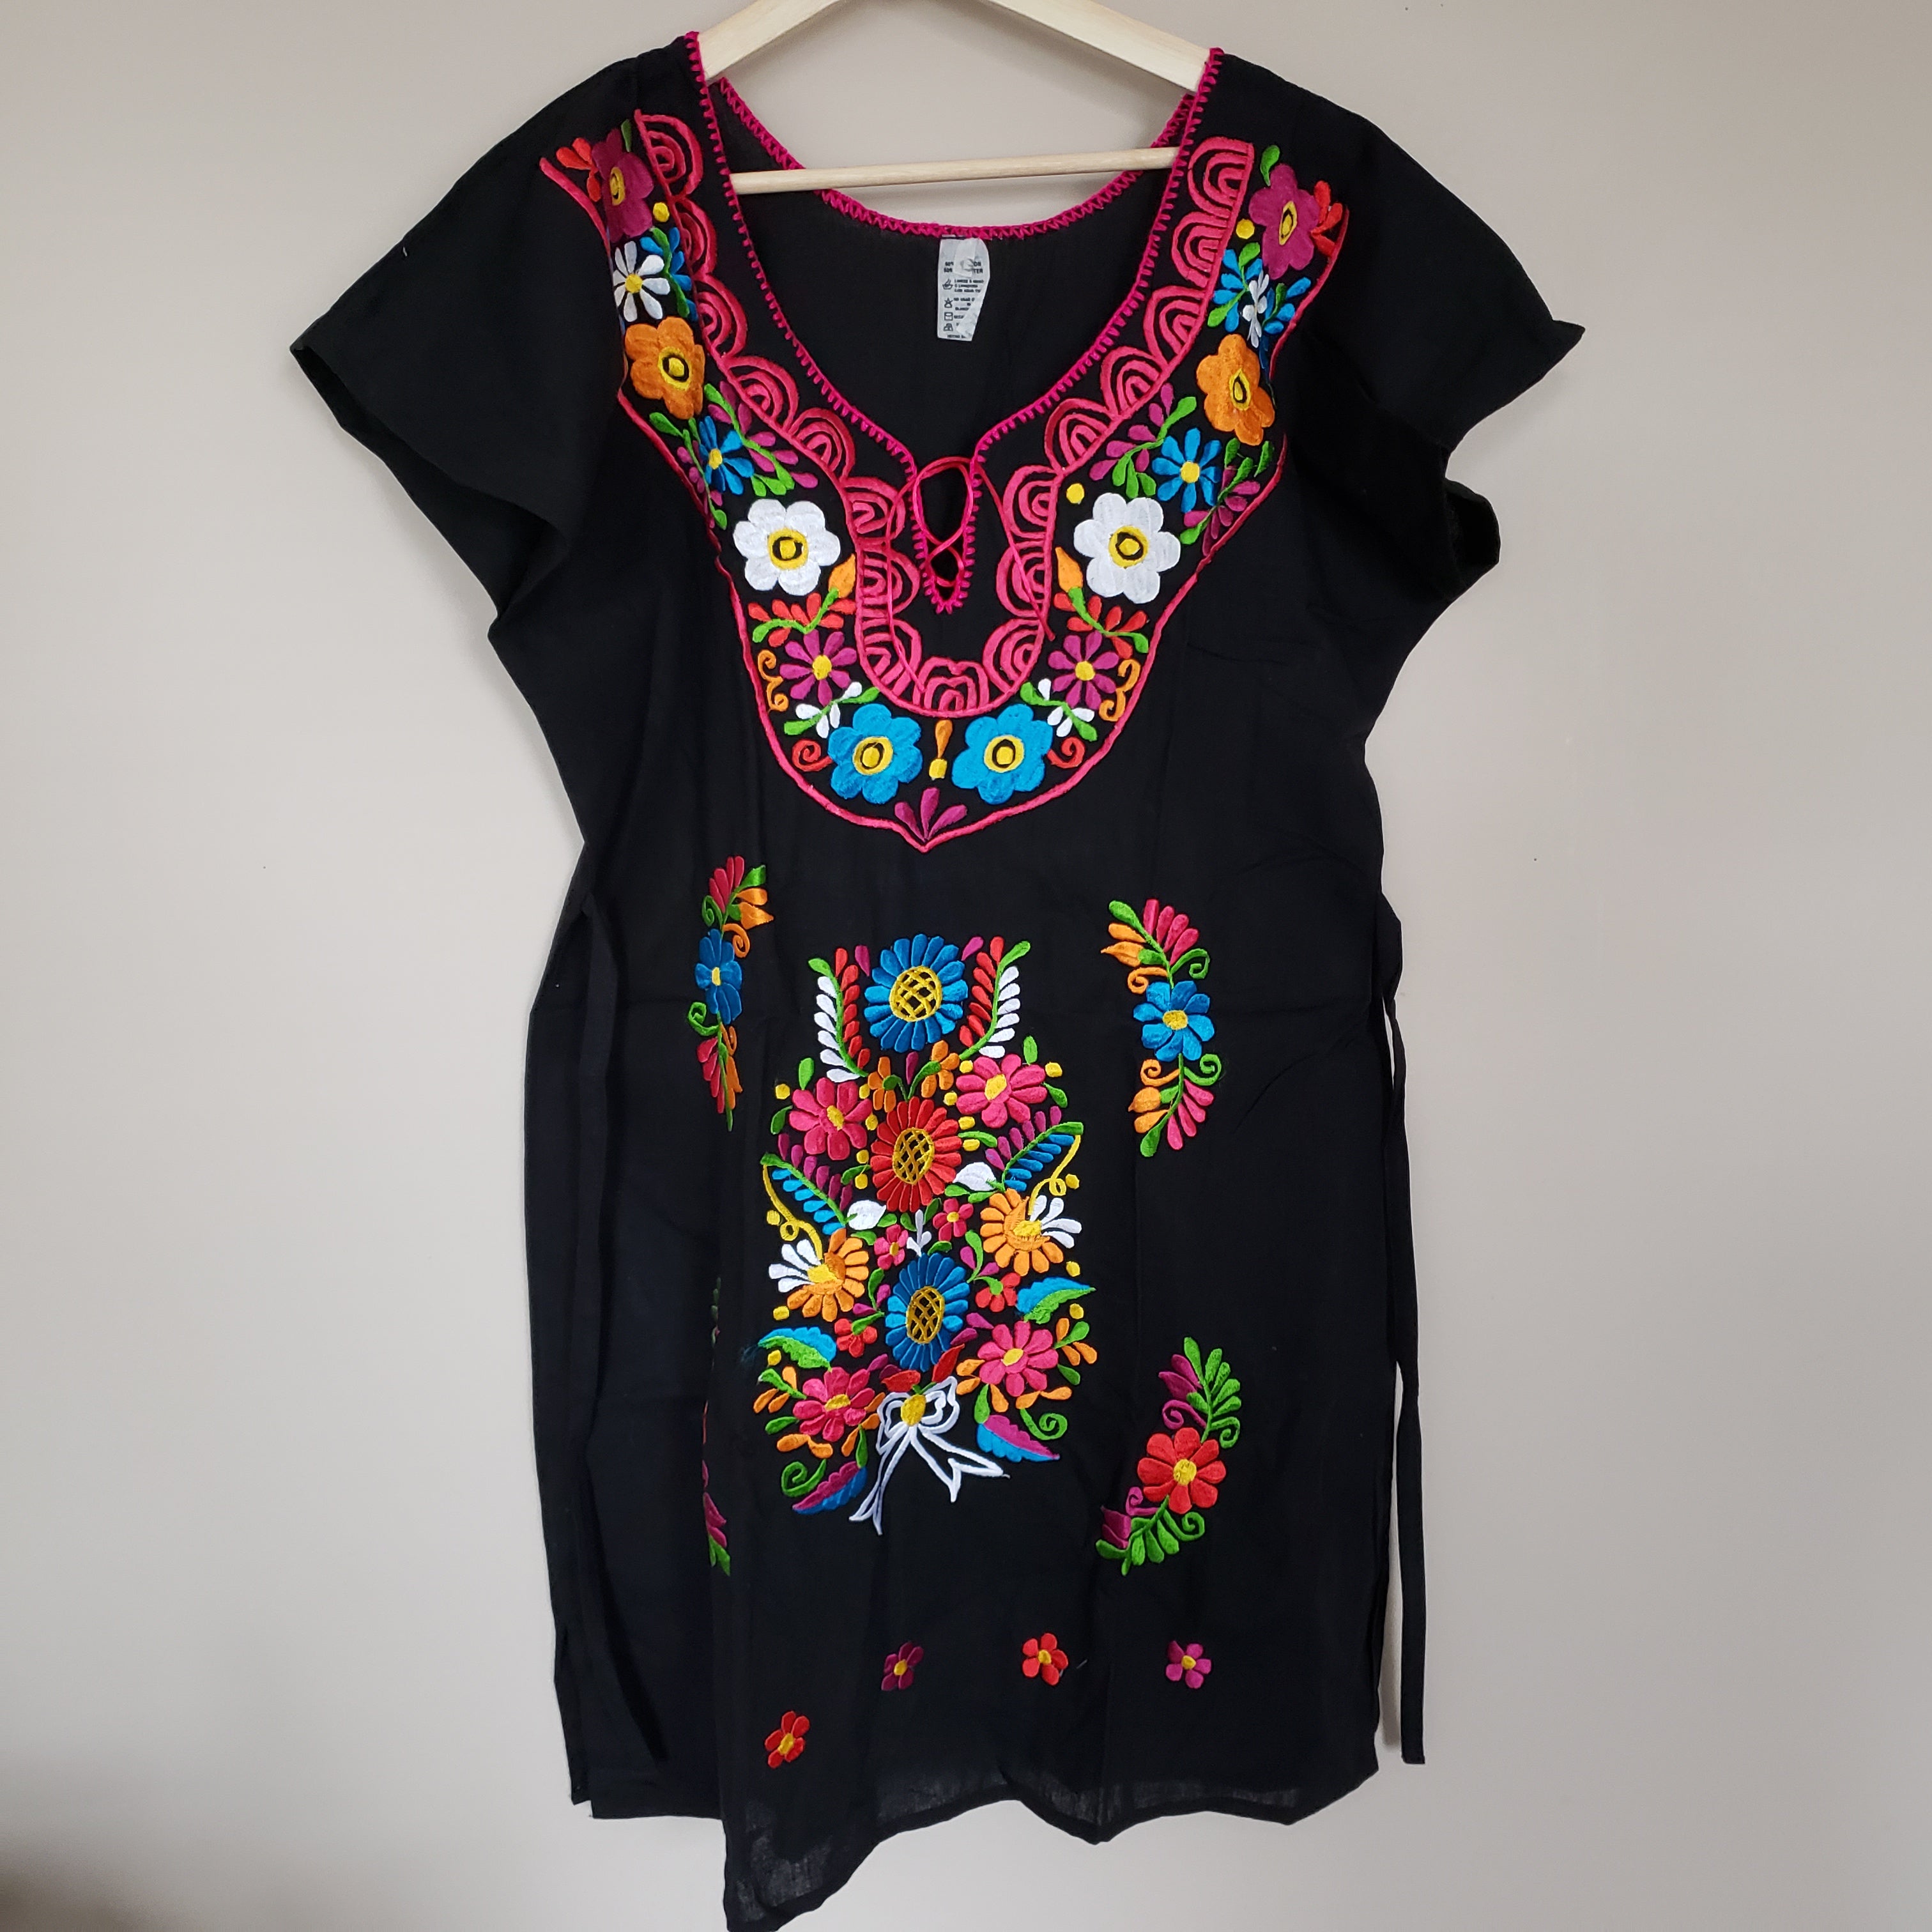 Mexican Traditional Dress. Floral Embroidered Dress. Mexican Fiesta Dress.  Lace Trim off the Shoulder Dress. -  Finland